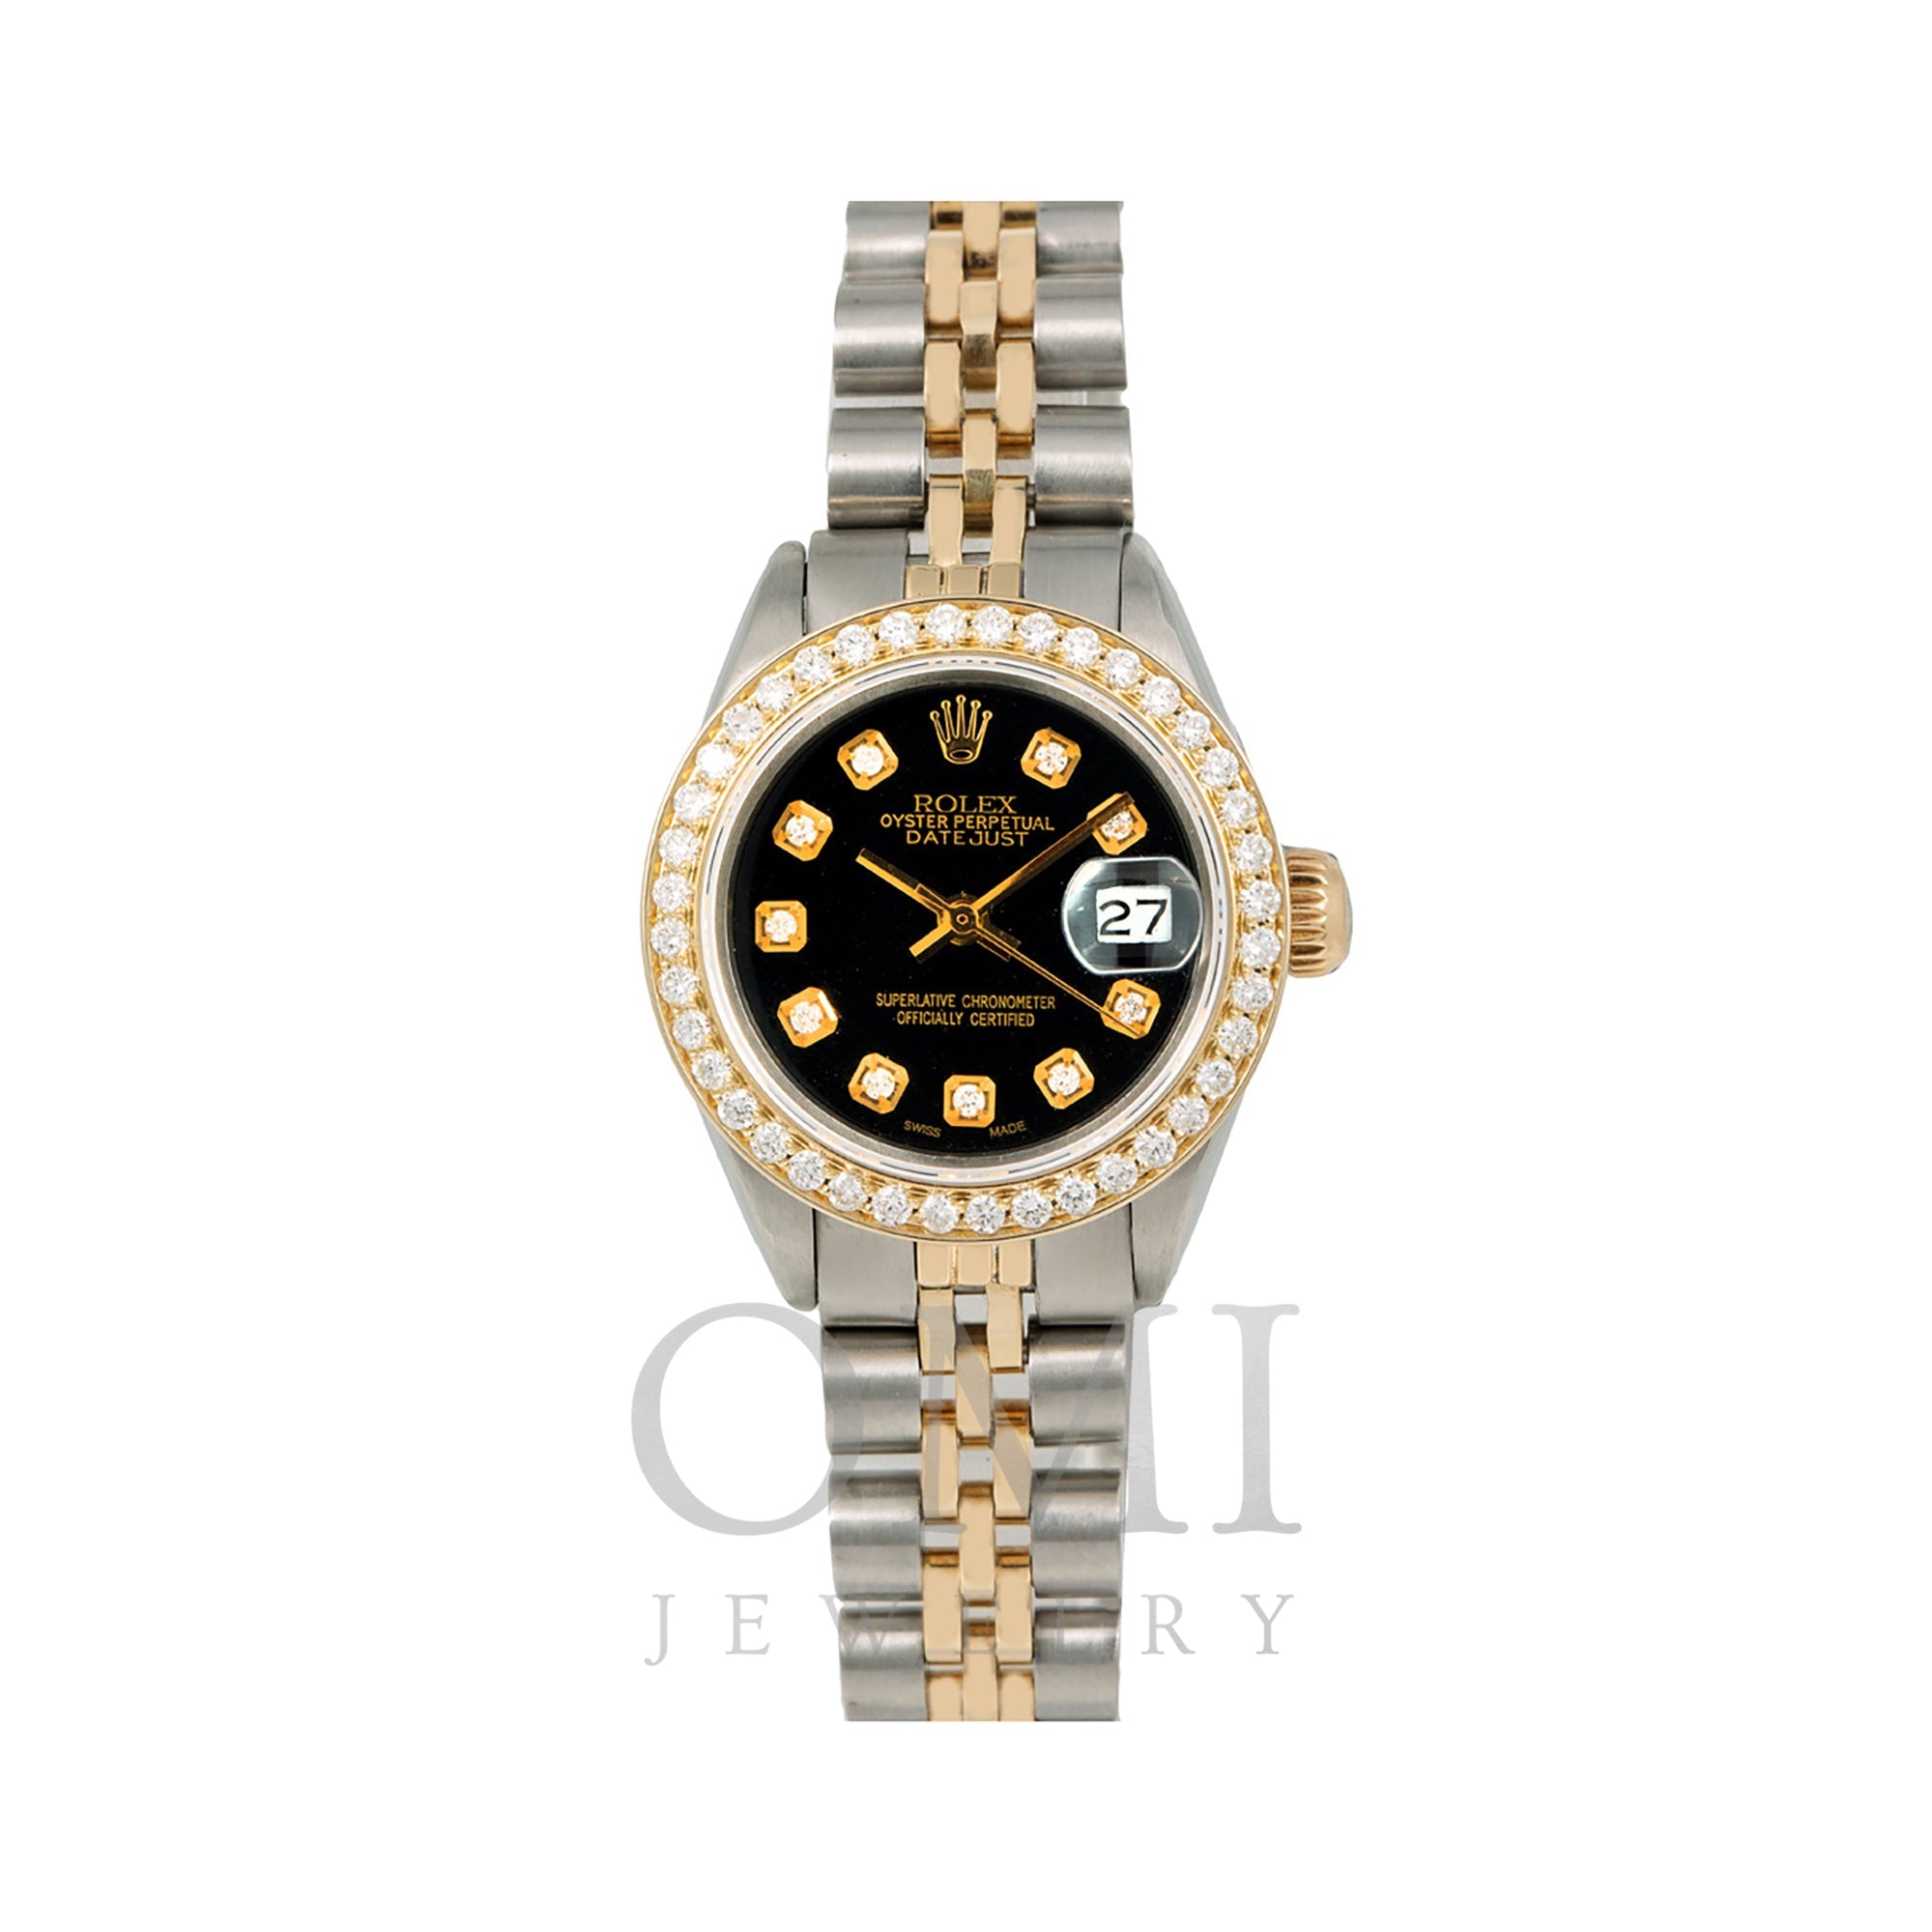 rolex oyster perpetual datejust black face with diamonds